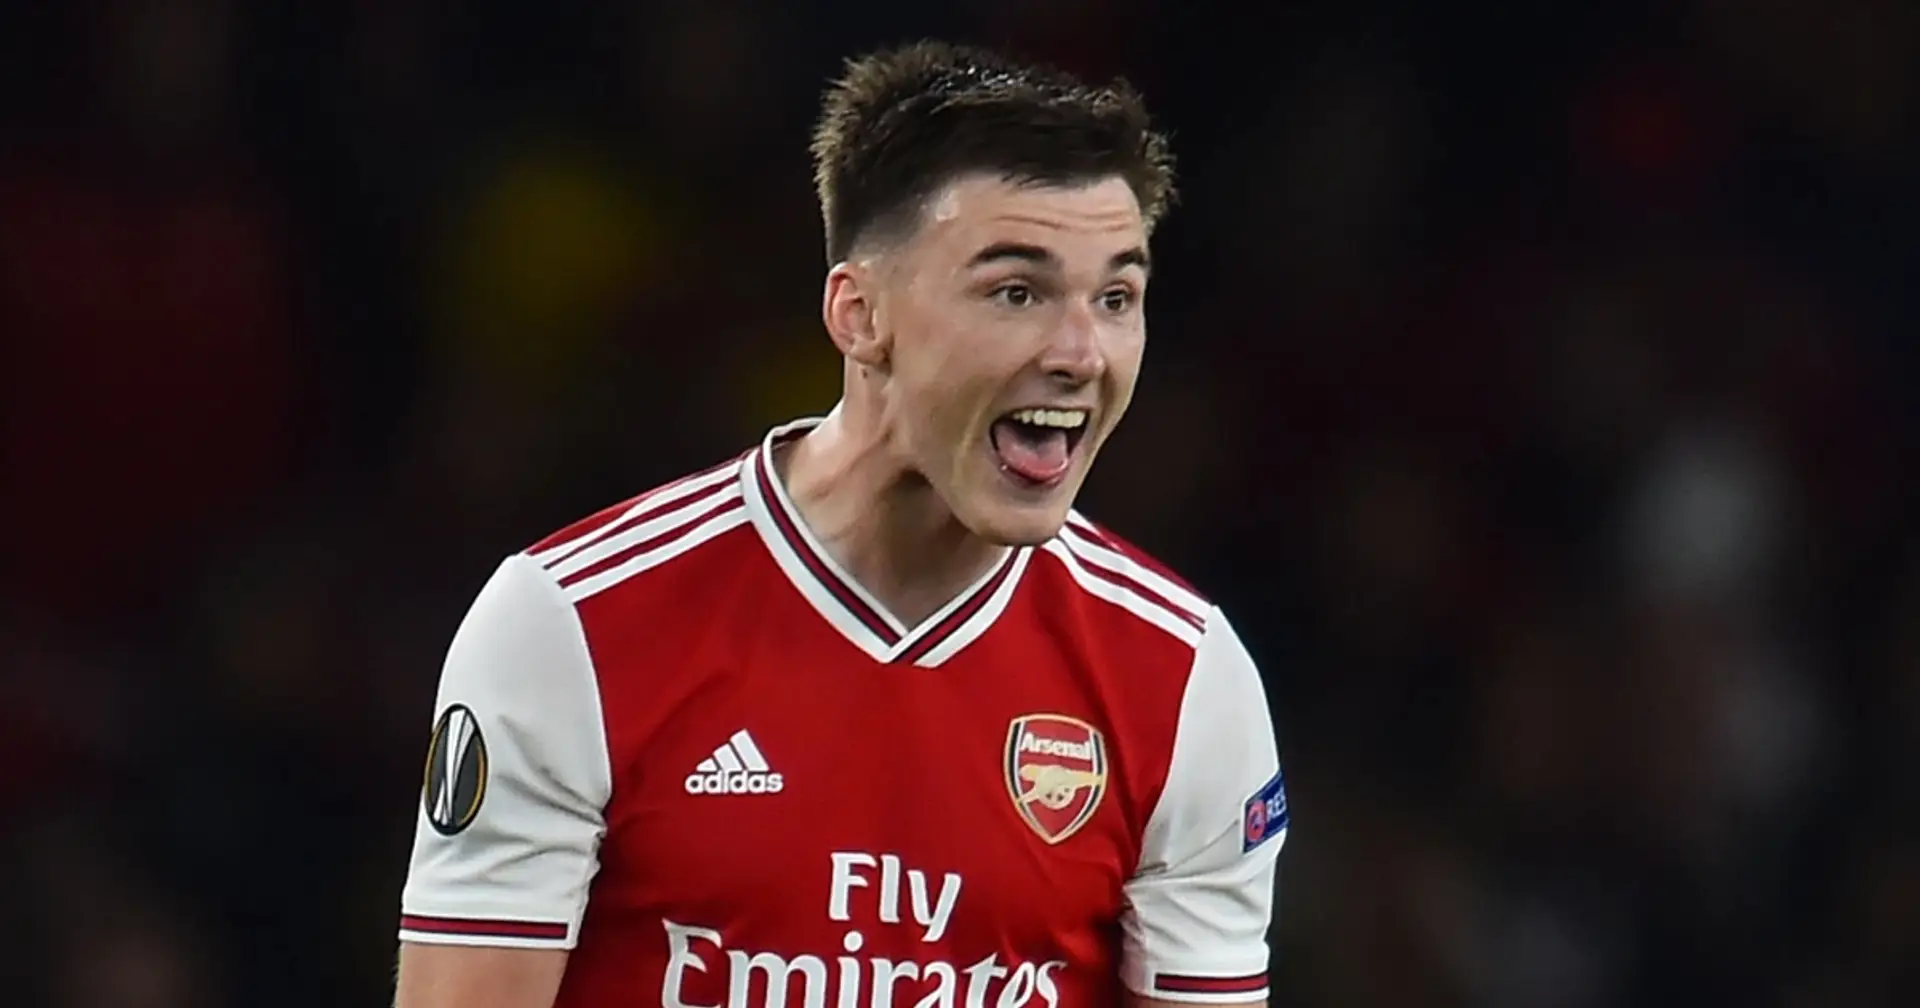 What Kieran Tierney's quarantine may've looked like? Arsenal fan comes up with hilarious Tesco suggestion